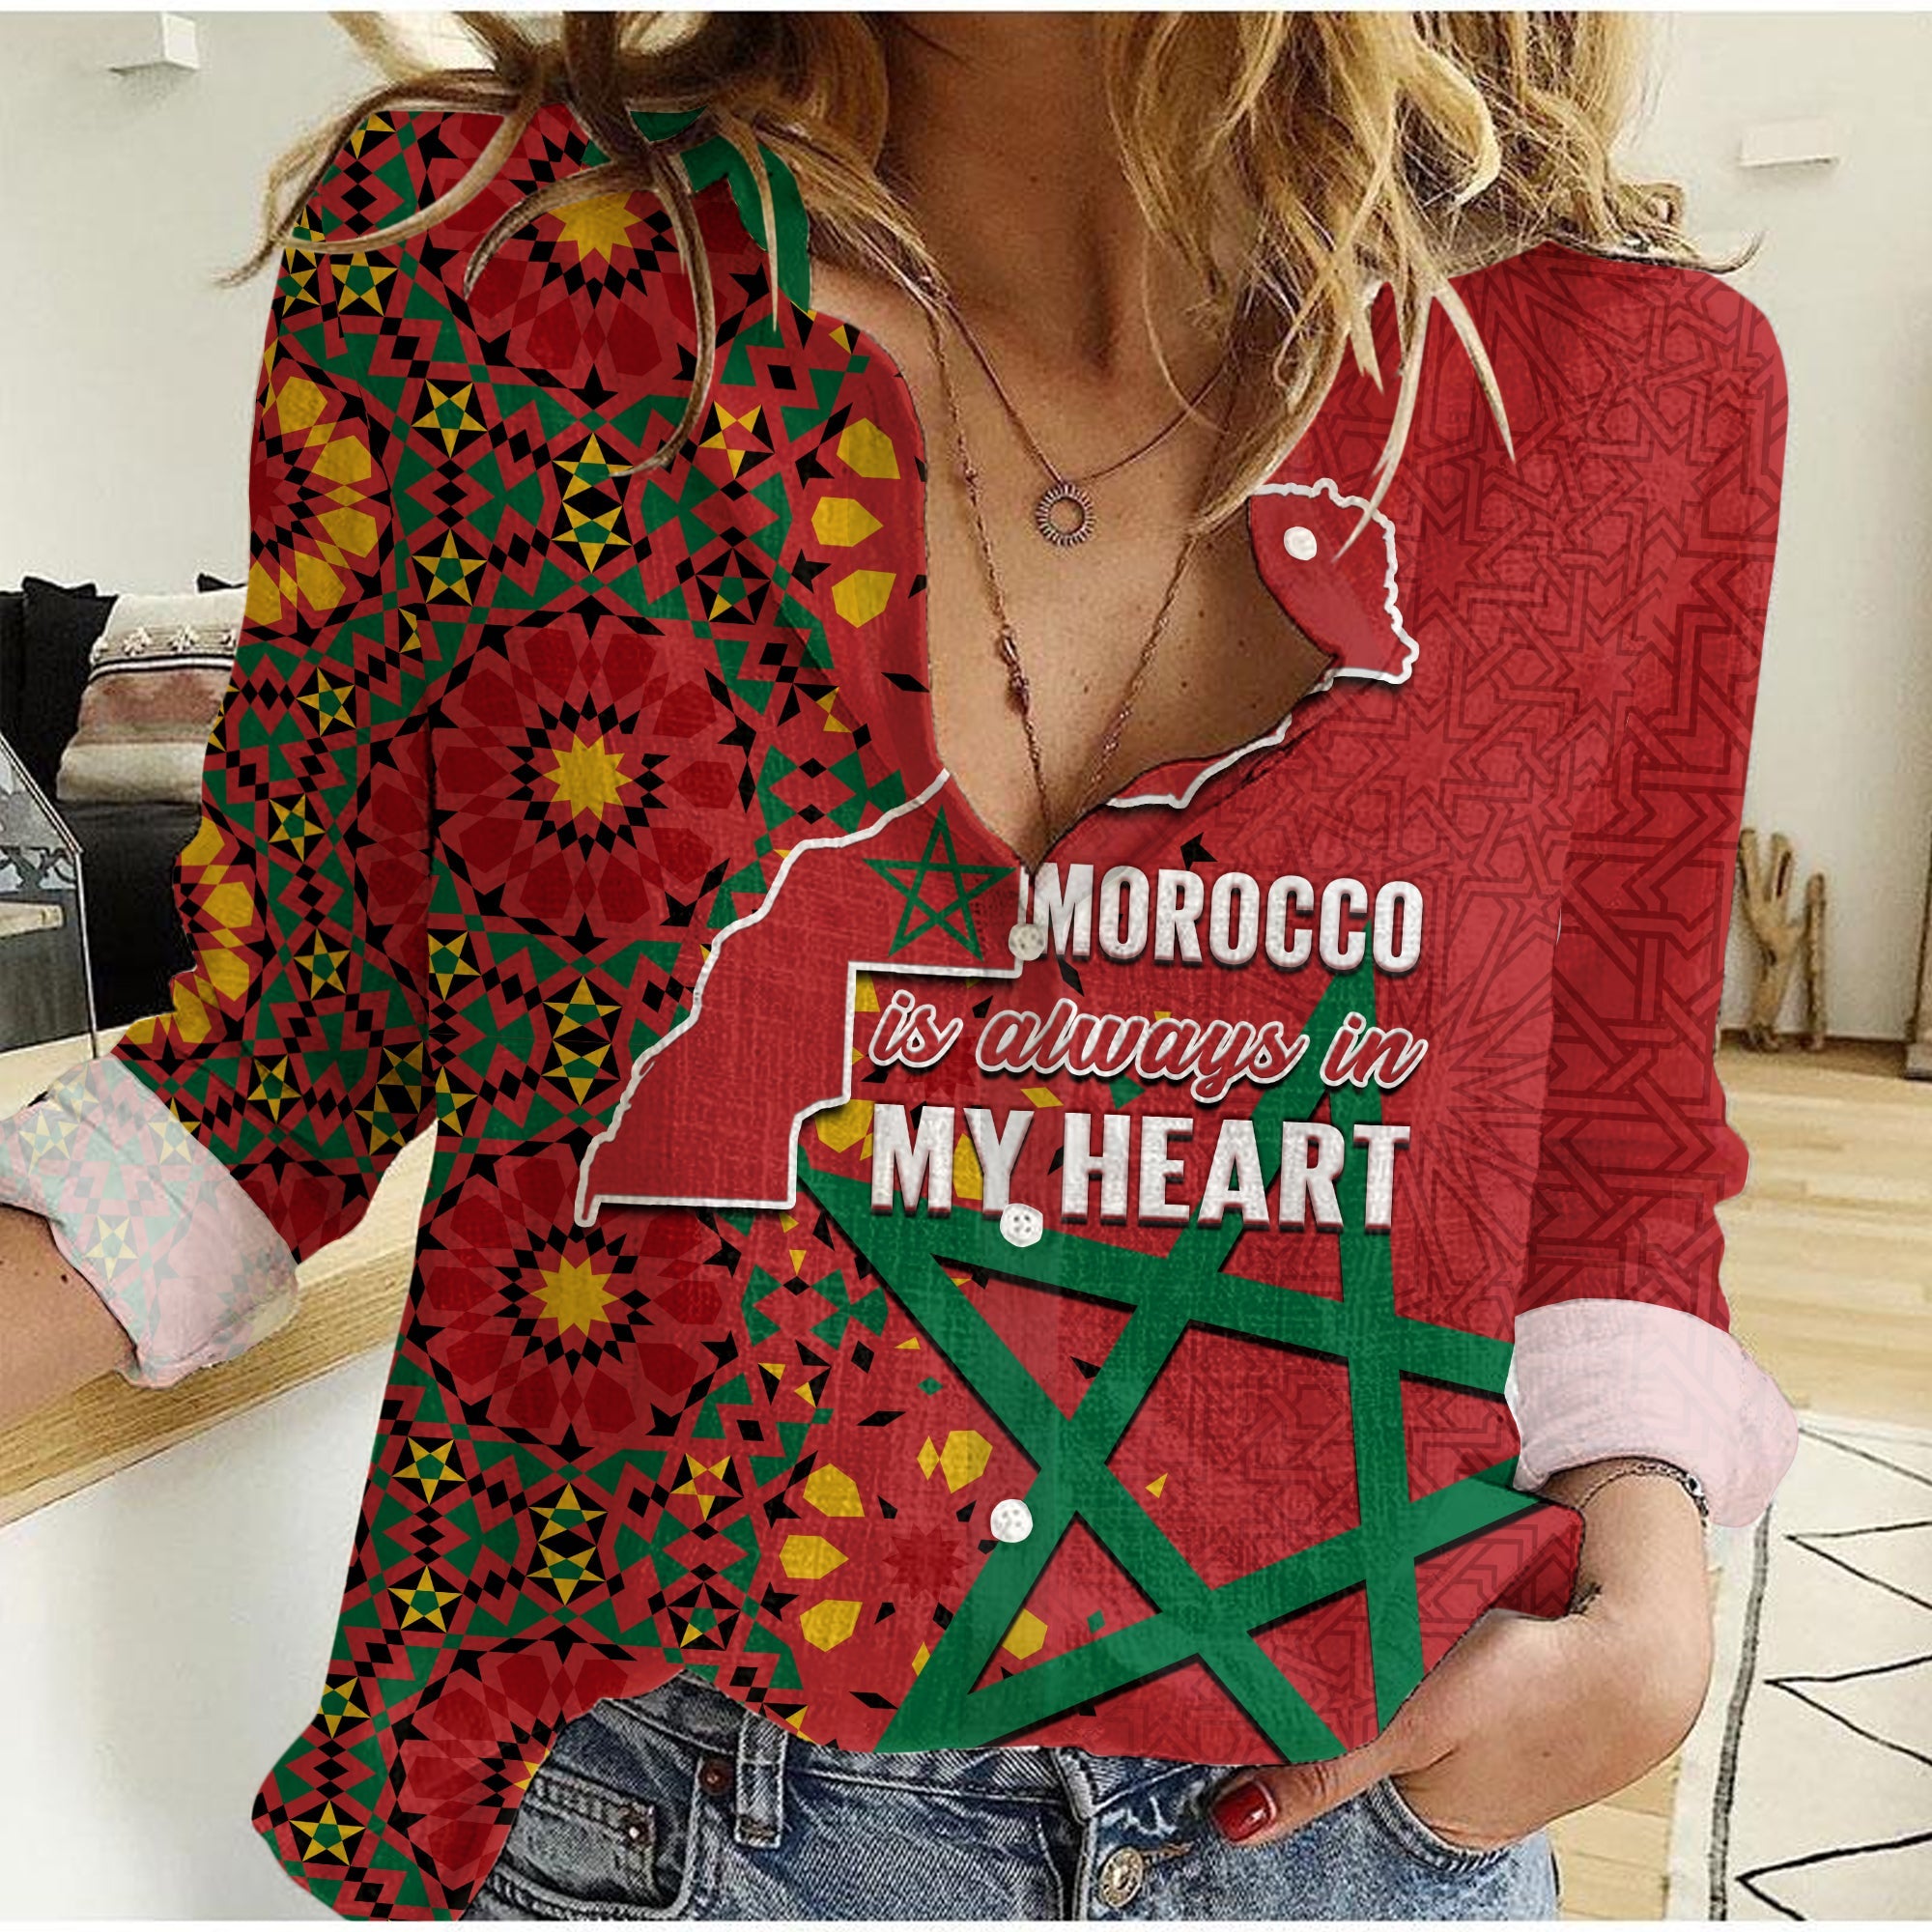 morocco-western-sahara-women-casual-shirt-map-red-moroccan-is-always-in-my-heart